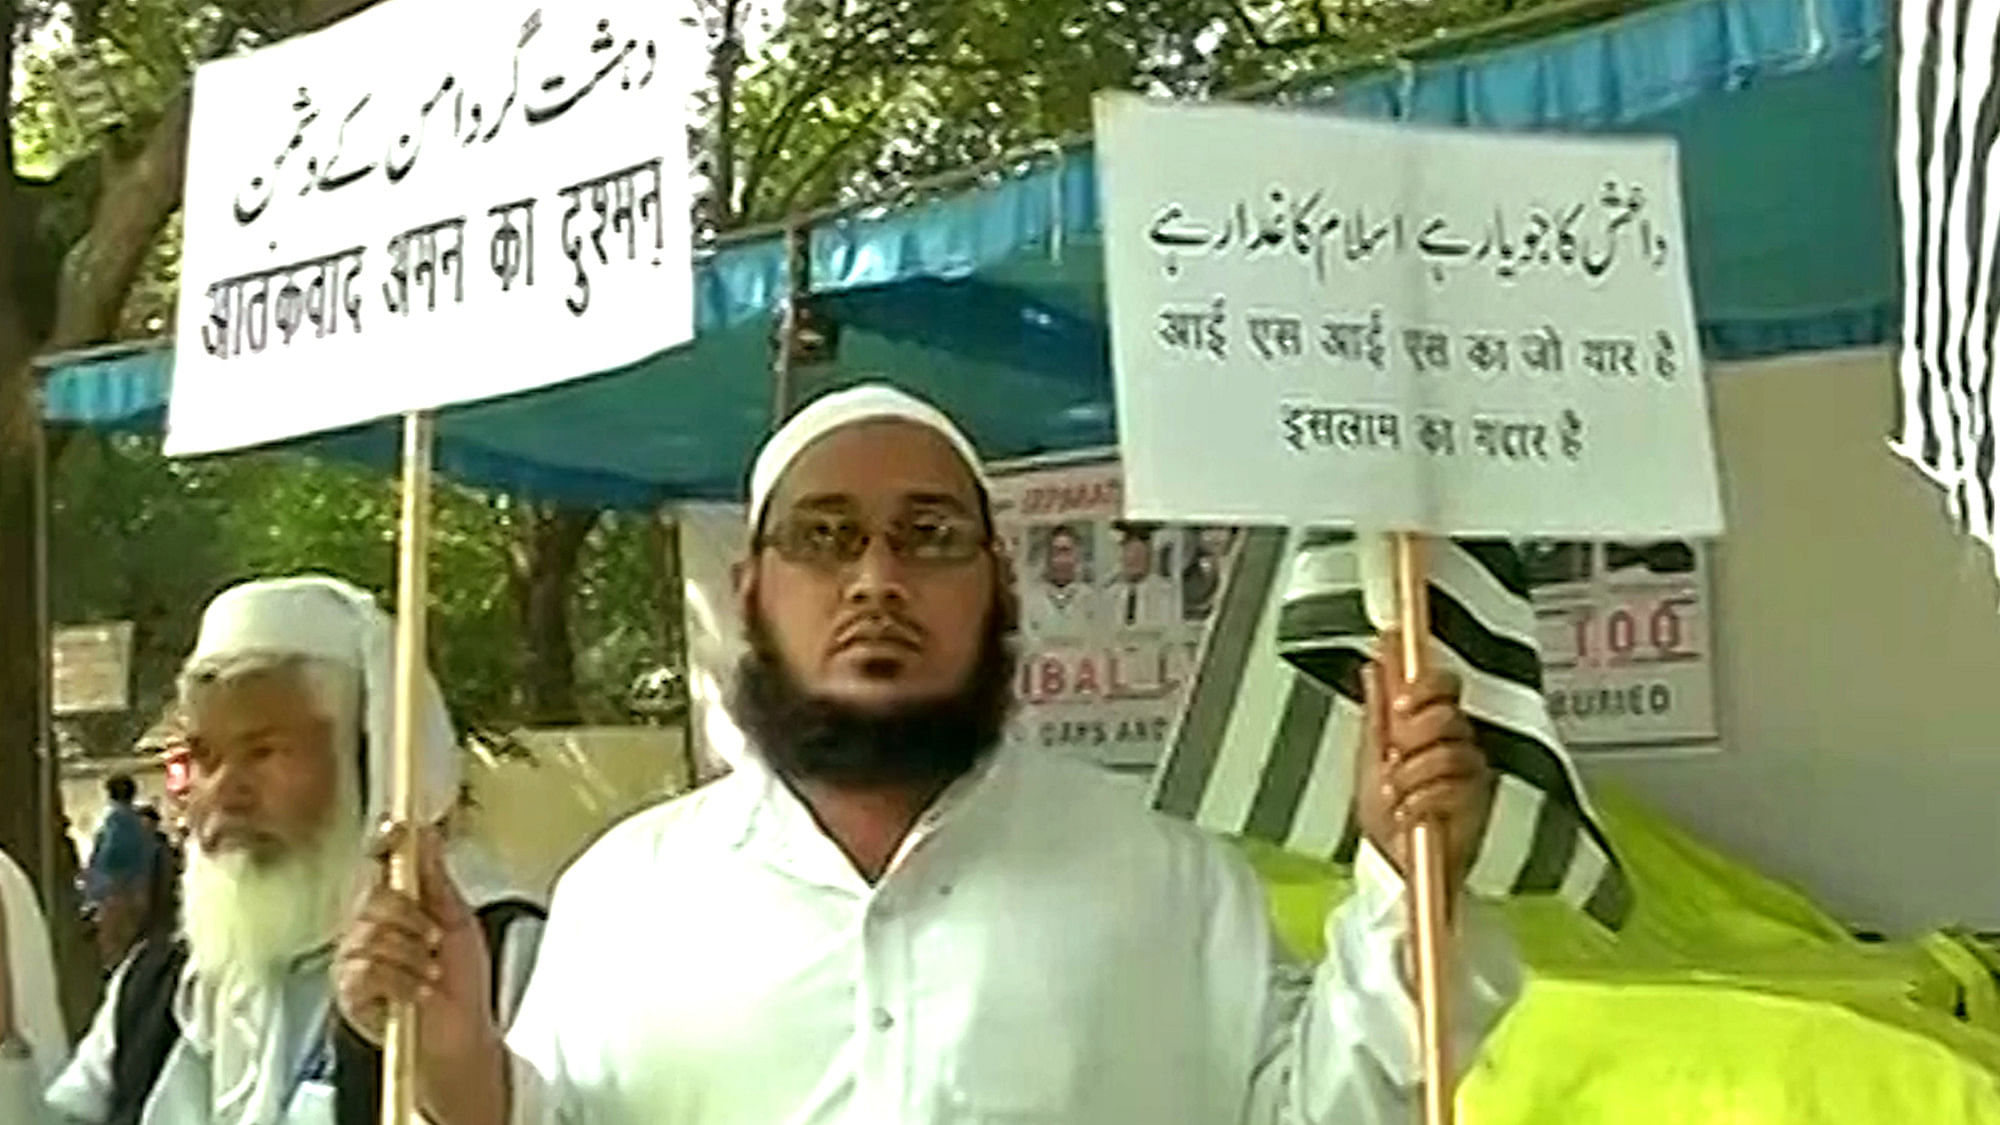  Jamiat Ulema-e-Hind, one of the leading Islamic organisations in India and affiliated Muslim outfits protest at Jantar Mantar. (Photo: ANI screengrab)